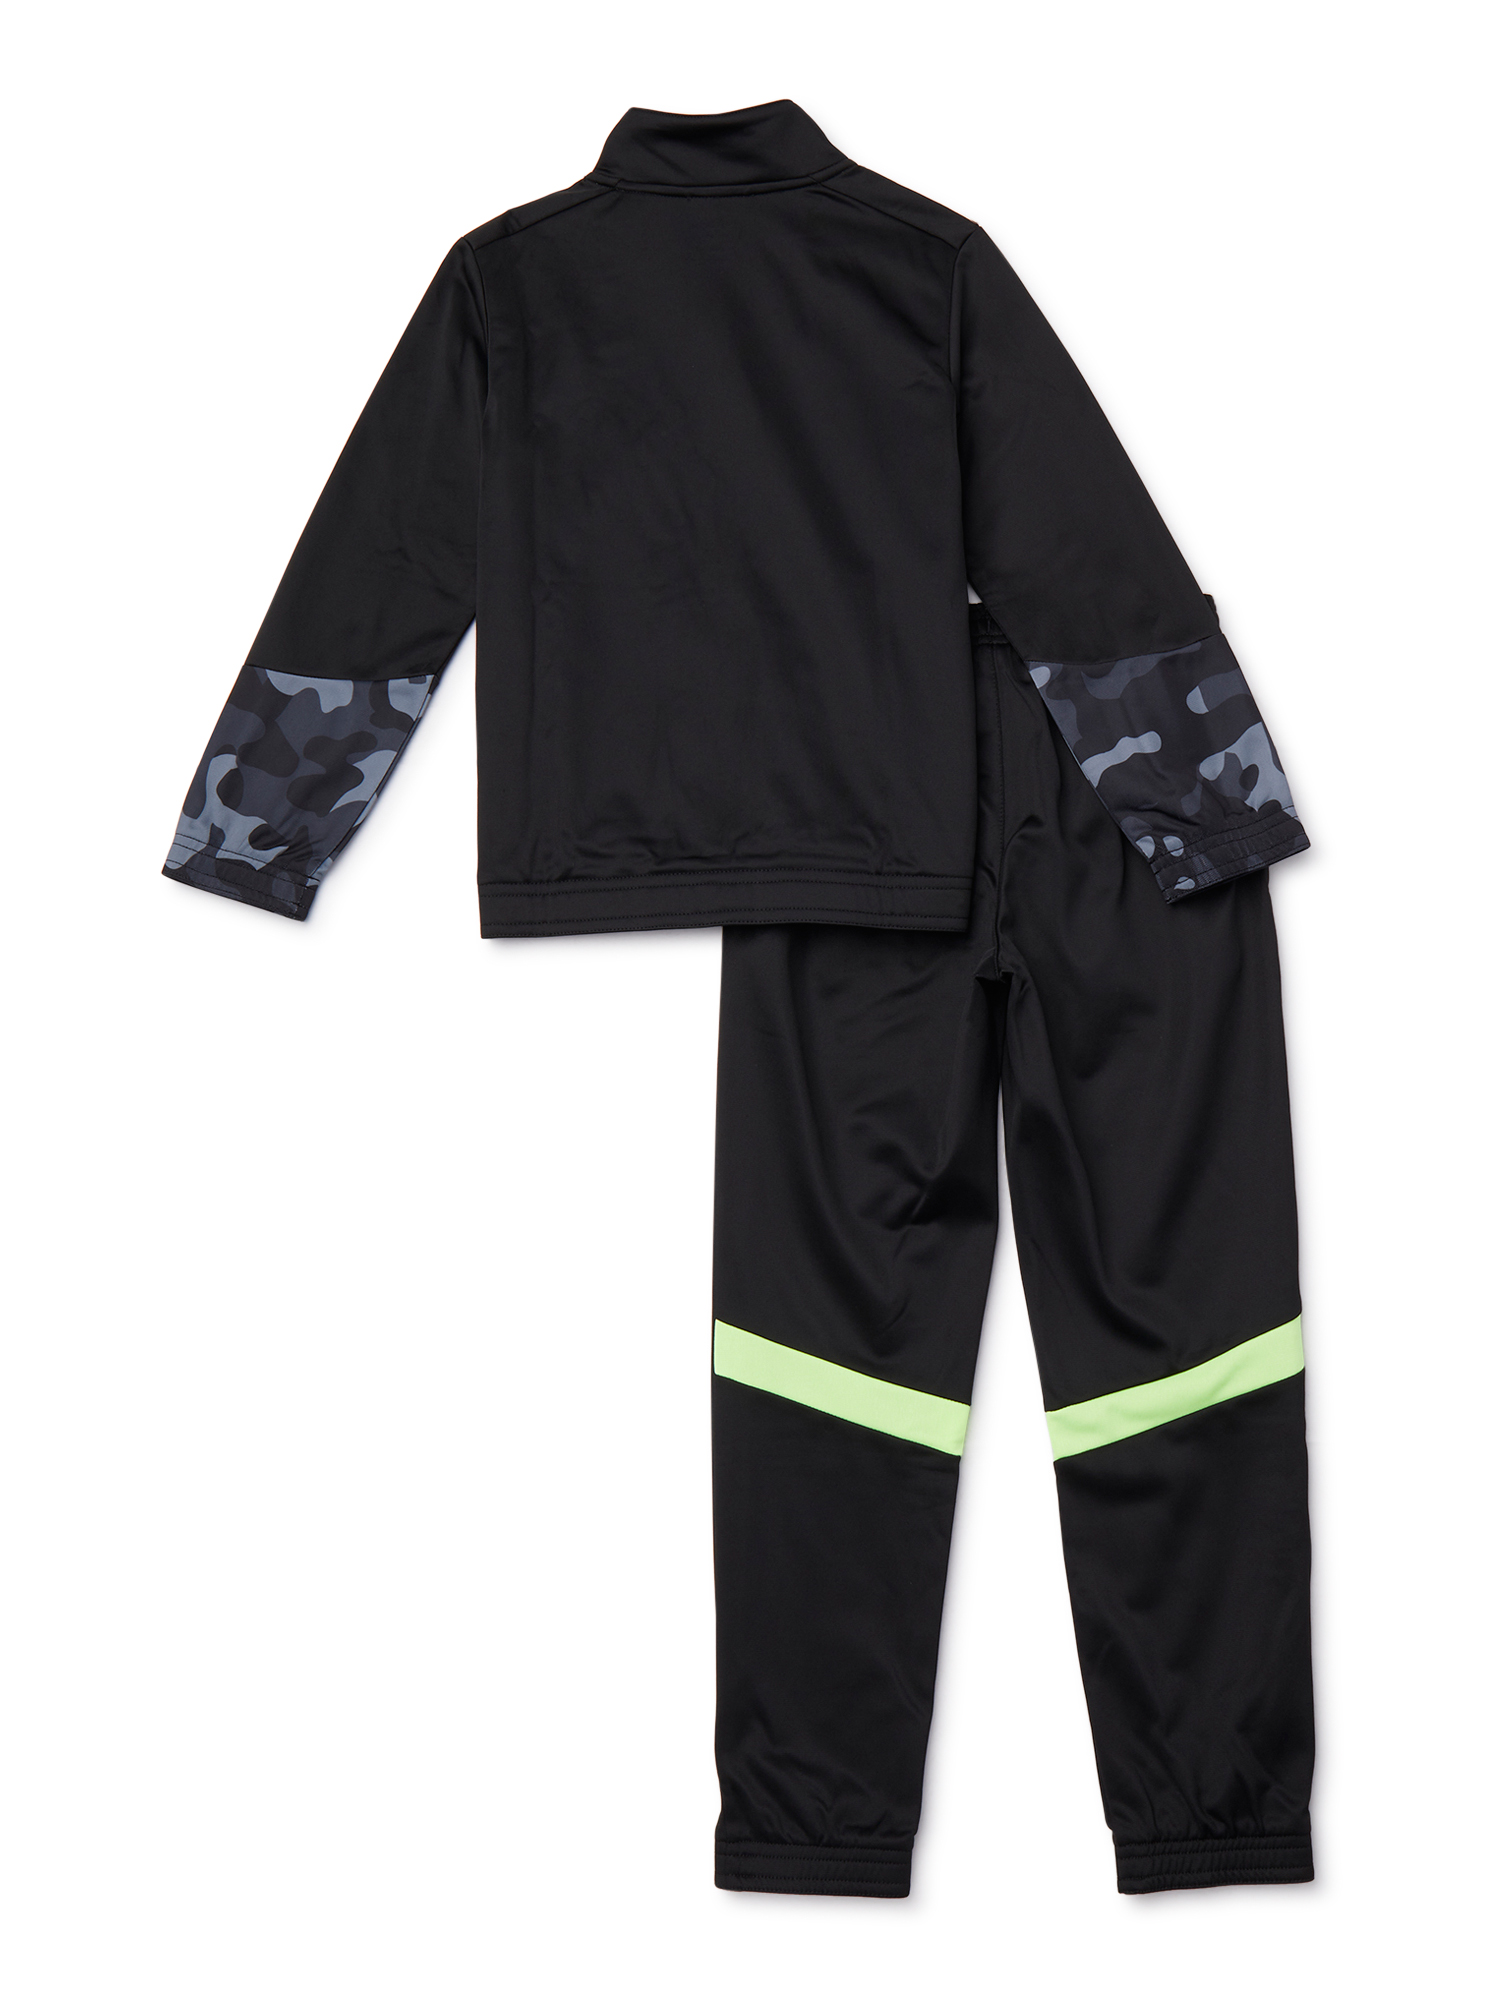 Athletic Works Boys Full Zip Jacket and Joggers 2-Piece Tracksuit, Sizes 4-16 - image 3 of 3